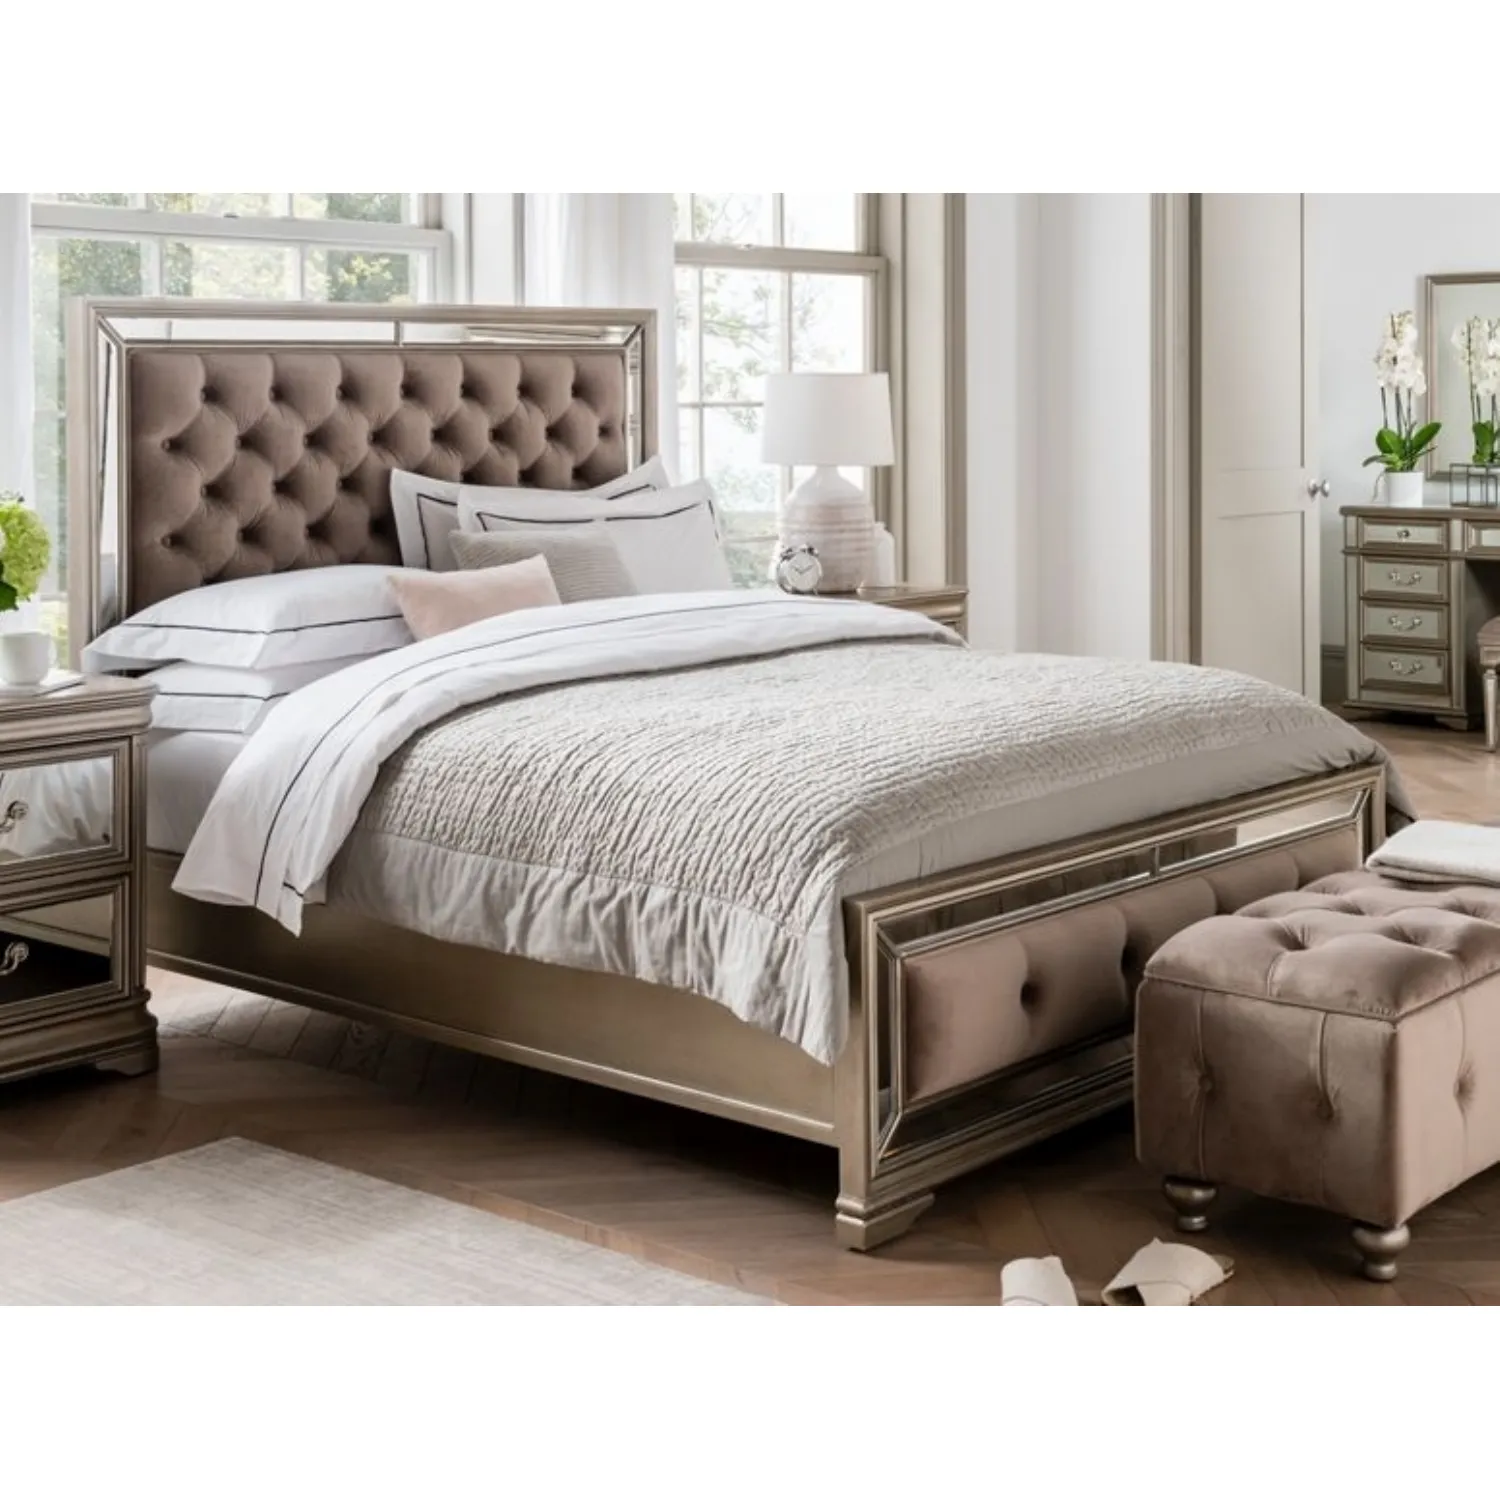 Classic Taupe Velvet Fabric 5ft King Size Bed Frame